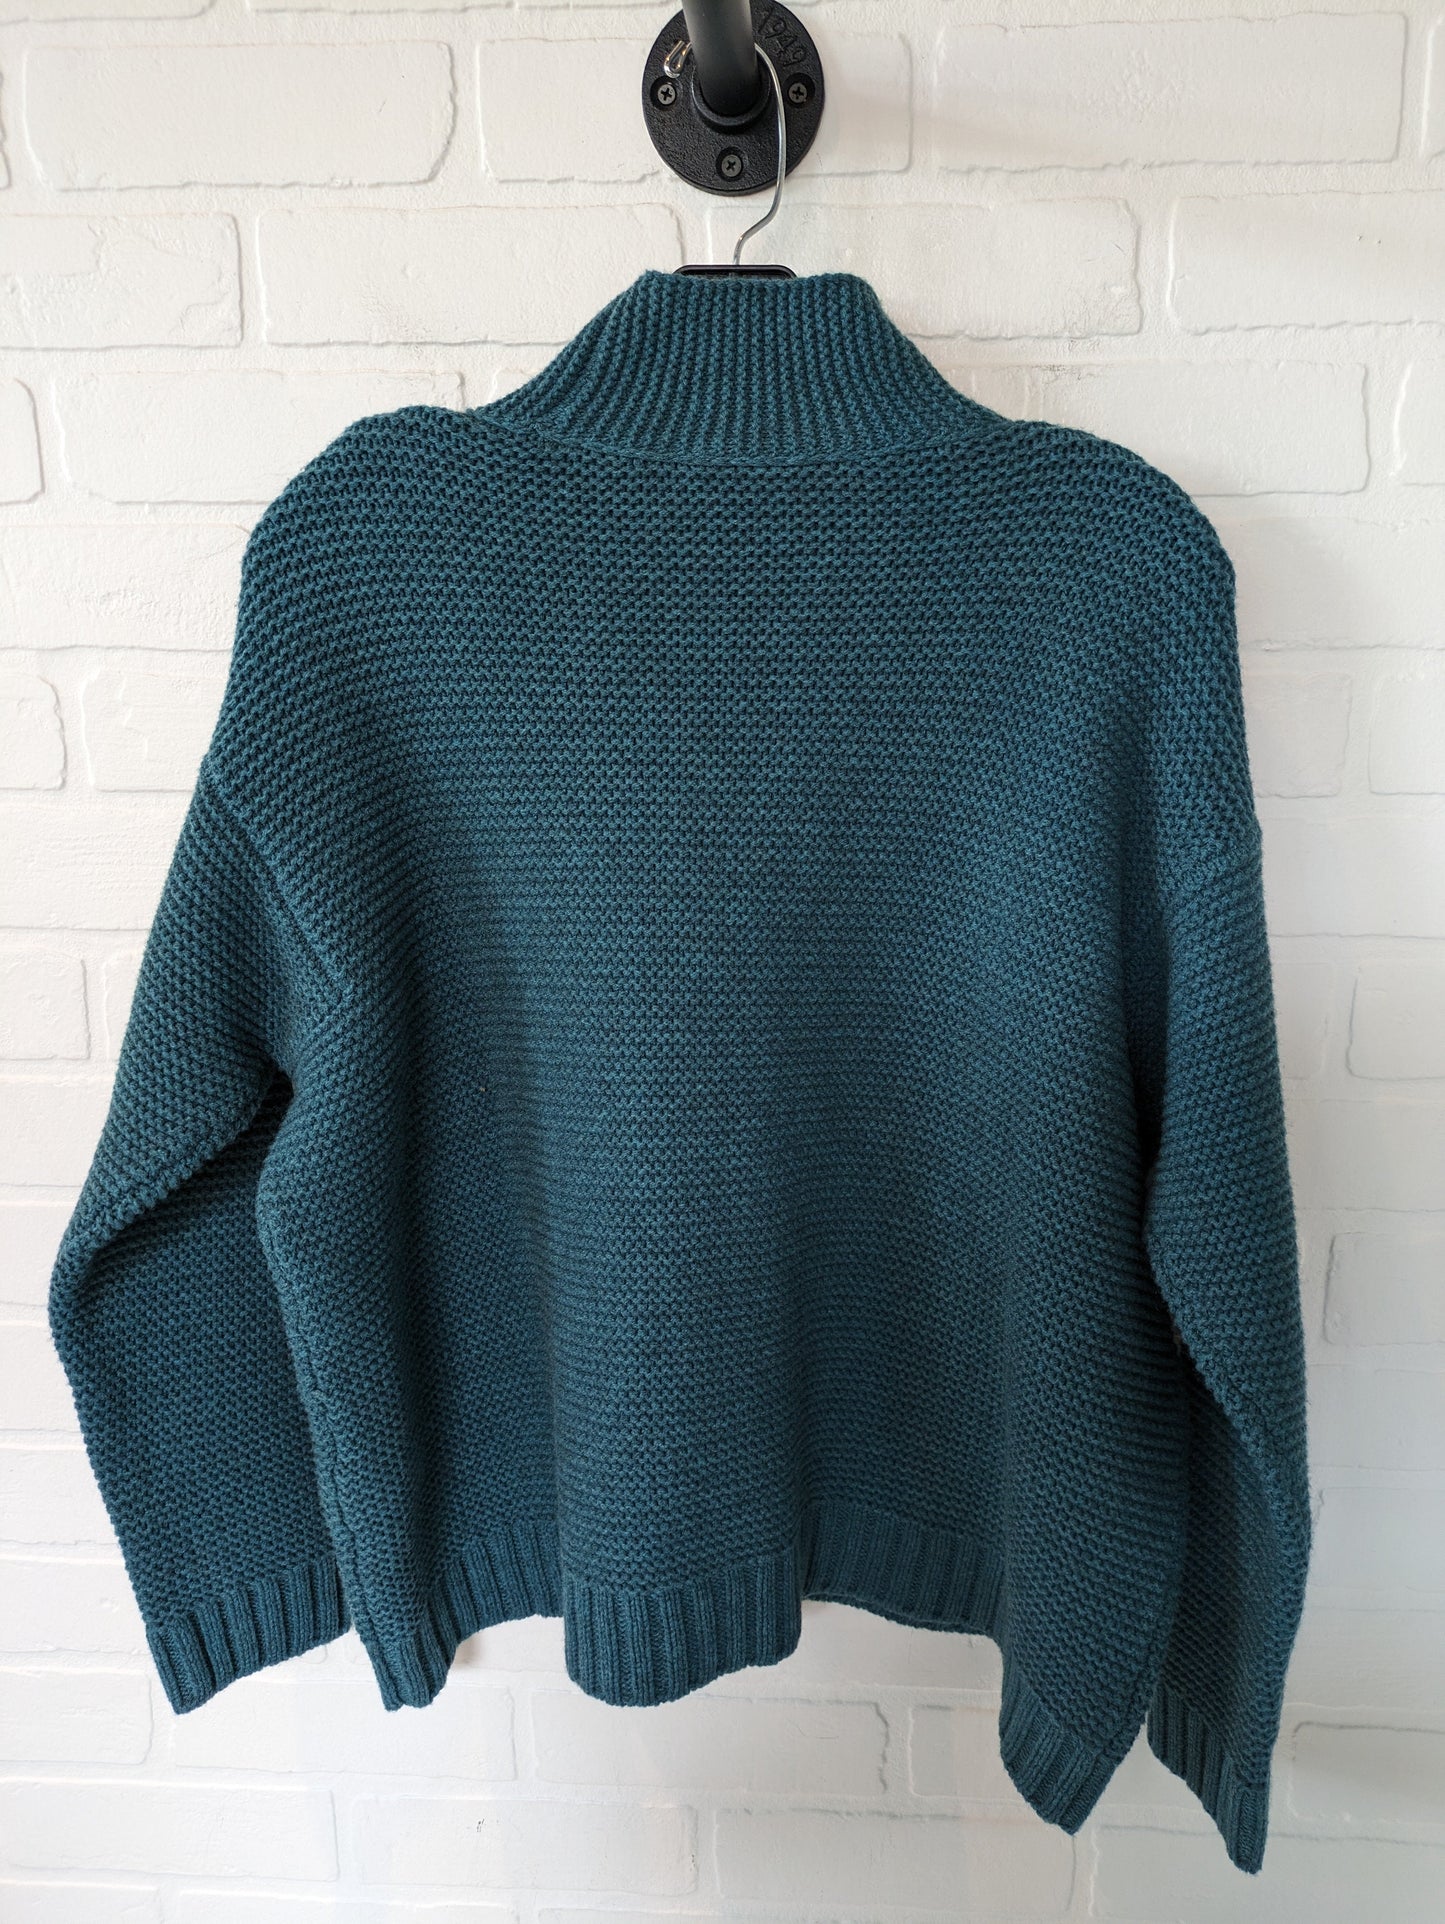 Teal Sweater Eileen Fisher, Size S